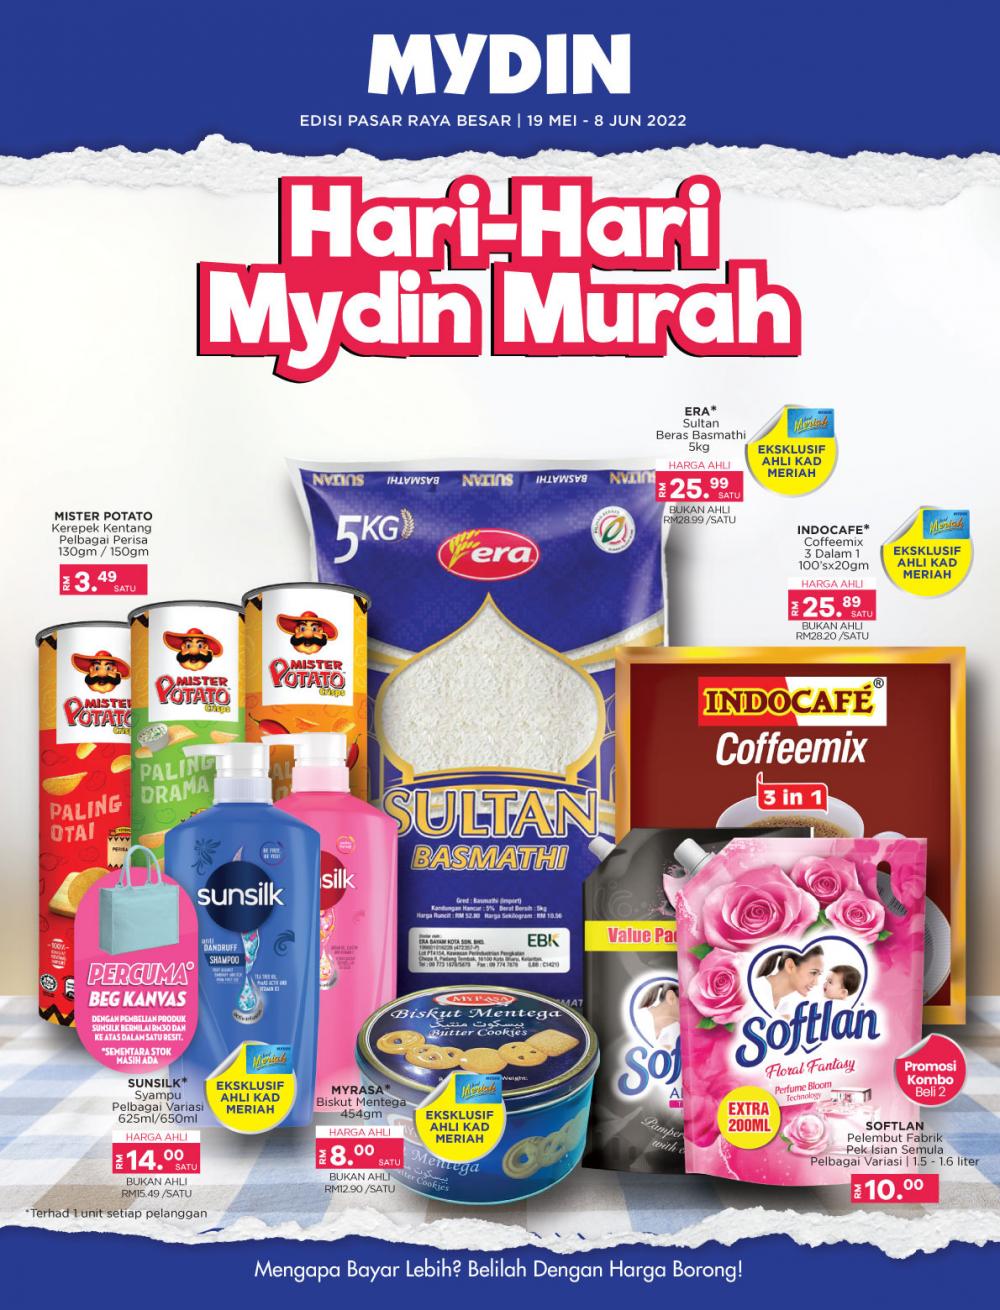 MYDIN Promotion Catalogue (19 May 2022 - 8 June 2022)